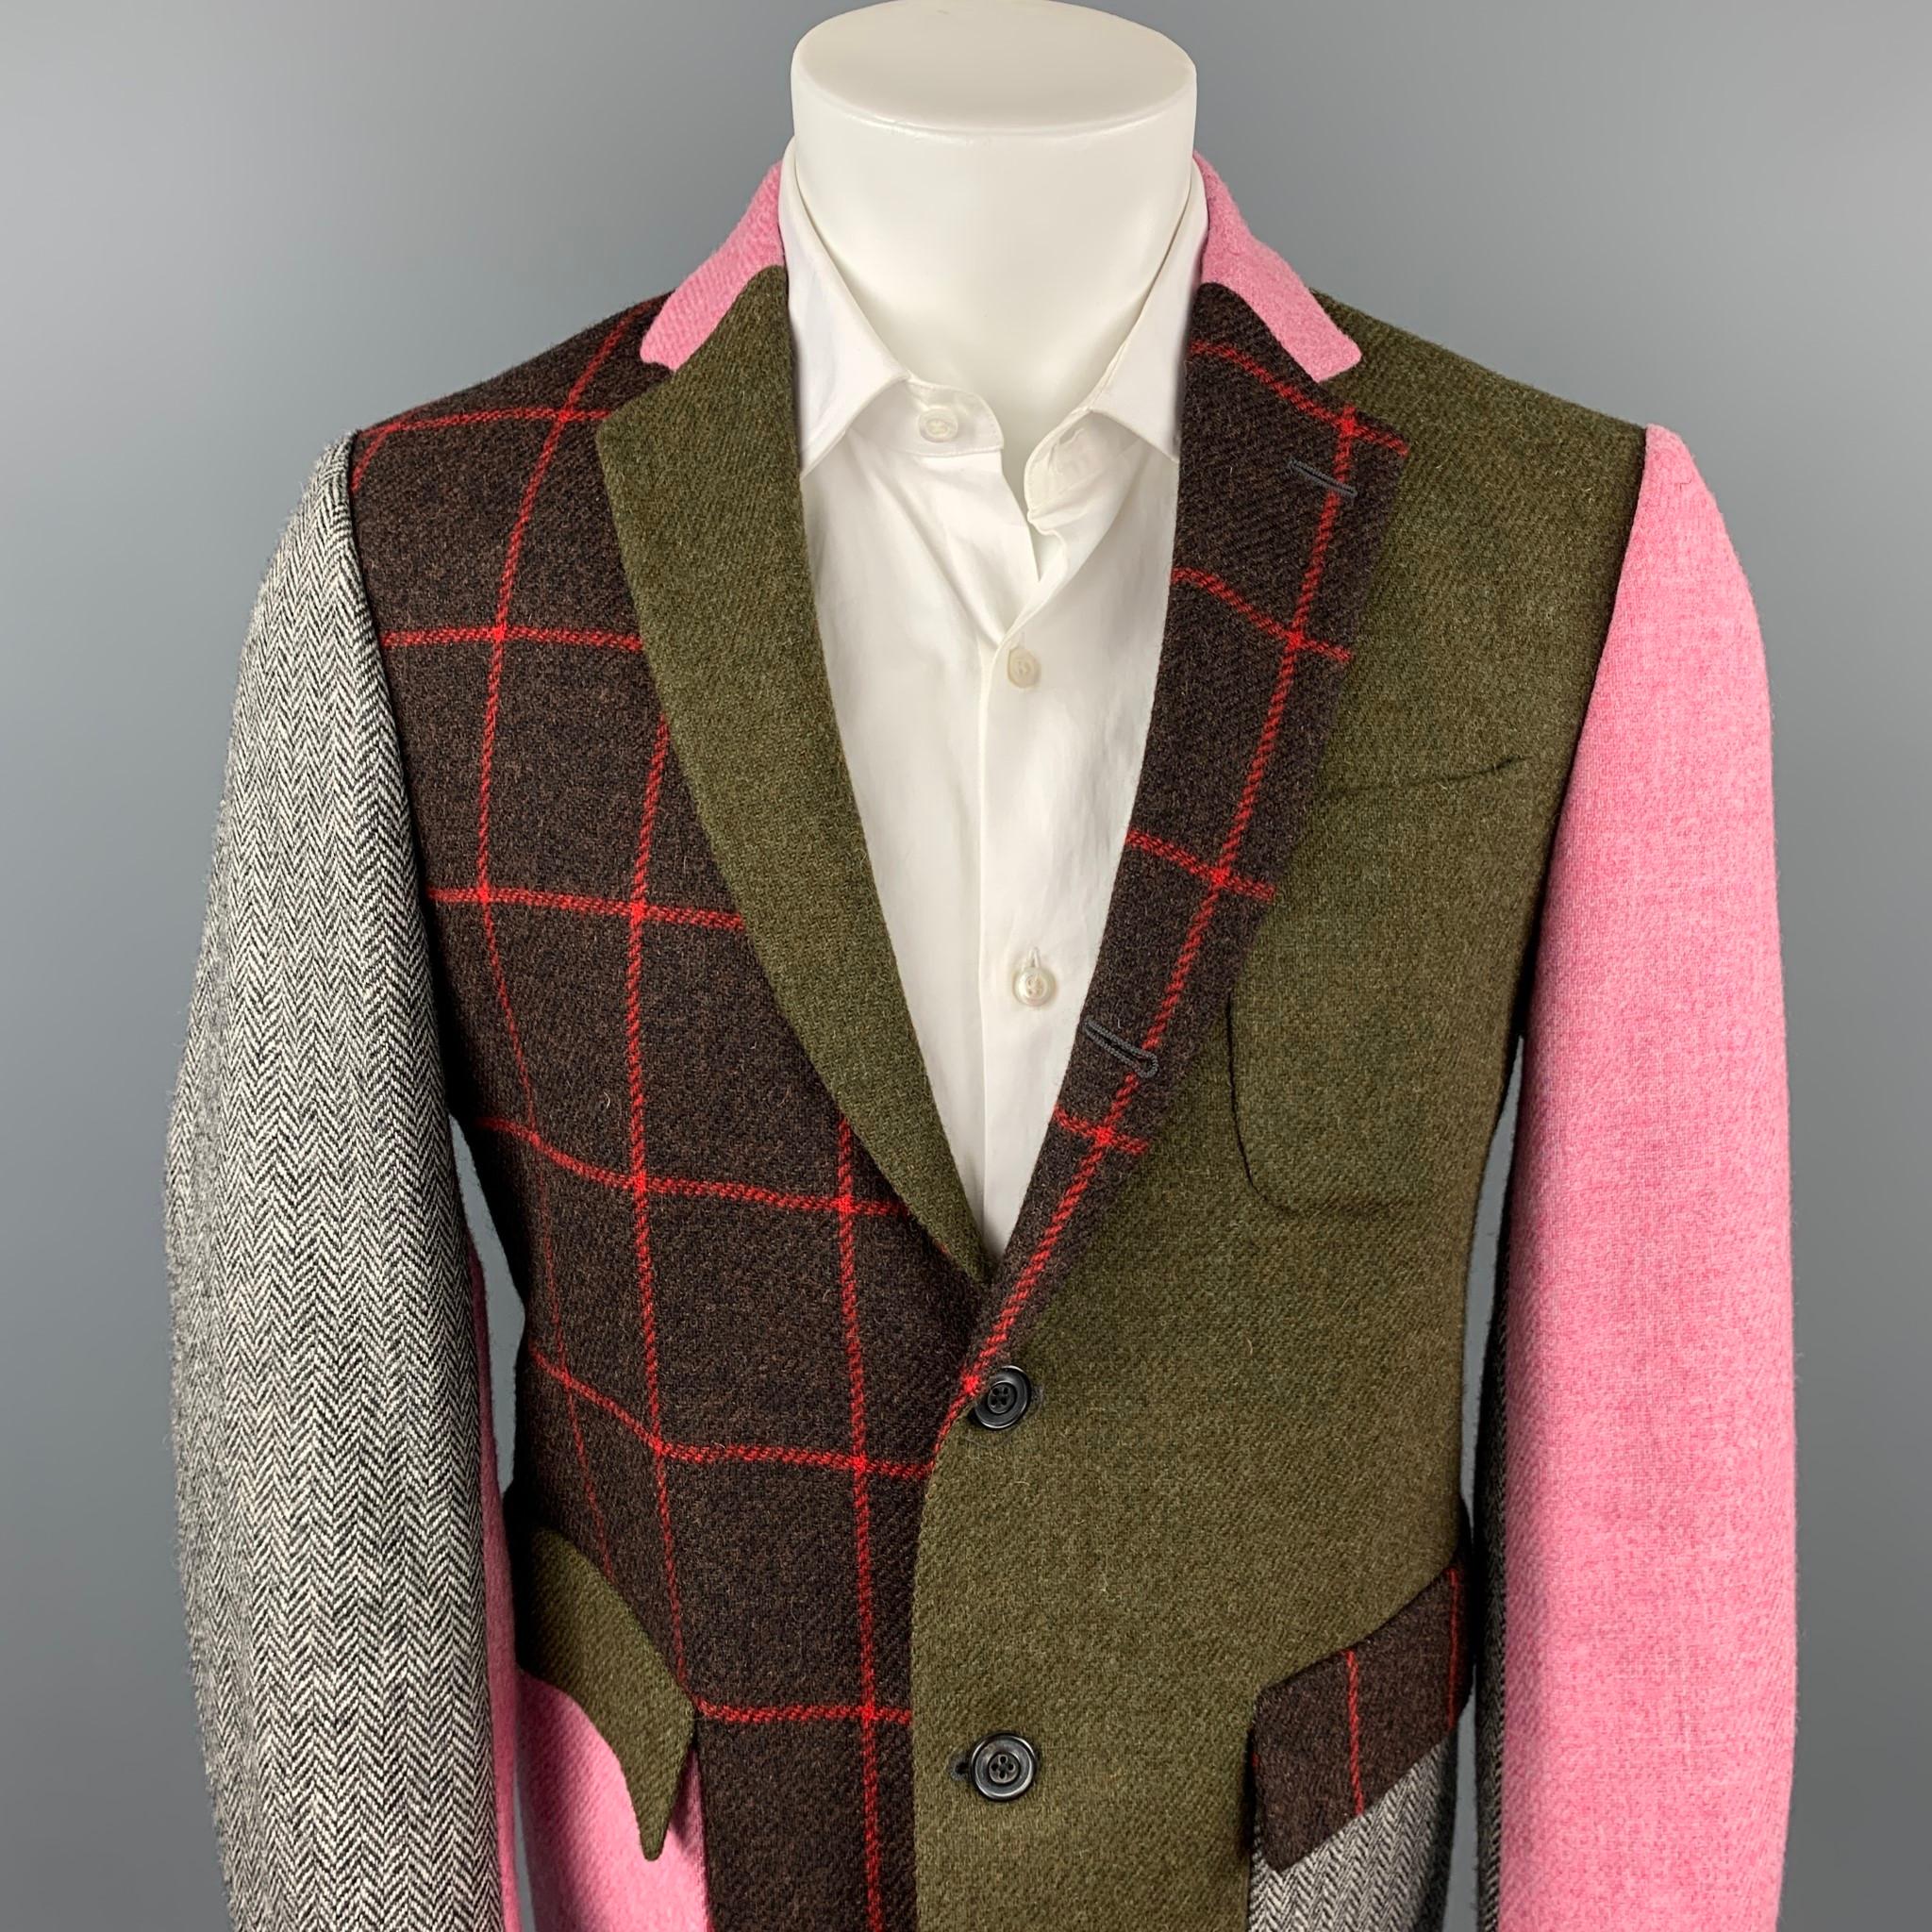 WOOSTER + LARDINI sport coat comes in a multi-color patchwork wool with a full liner featuring a notch lapel, flap pockets, and a three button closure. Made in Italy.

Excellent Pre-Owned Condition.
Marked: IT 50

Measurements:

Shoulder: 17.5